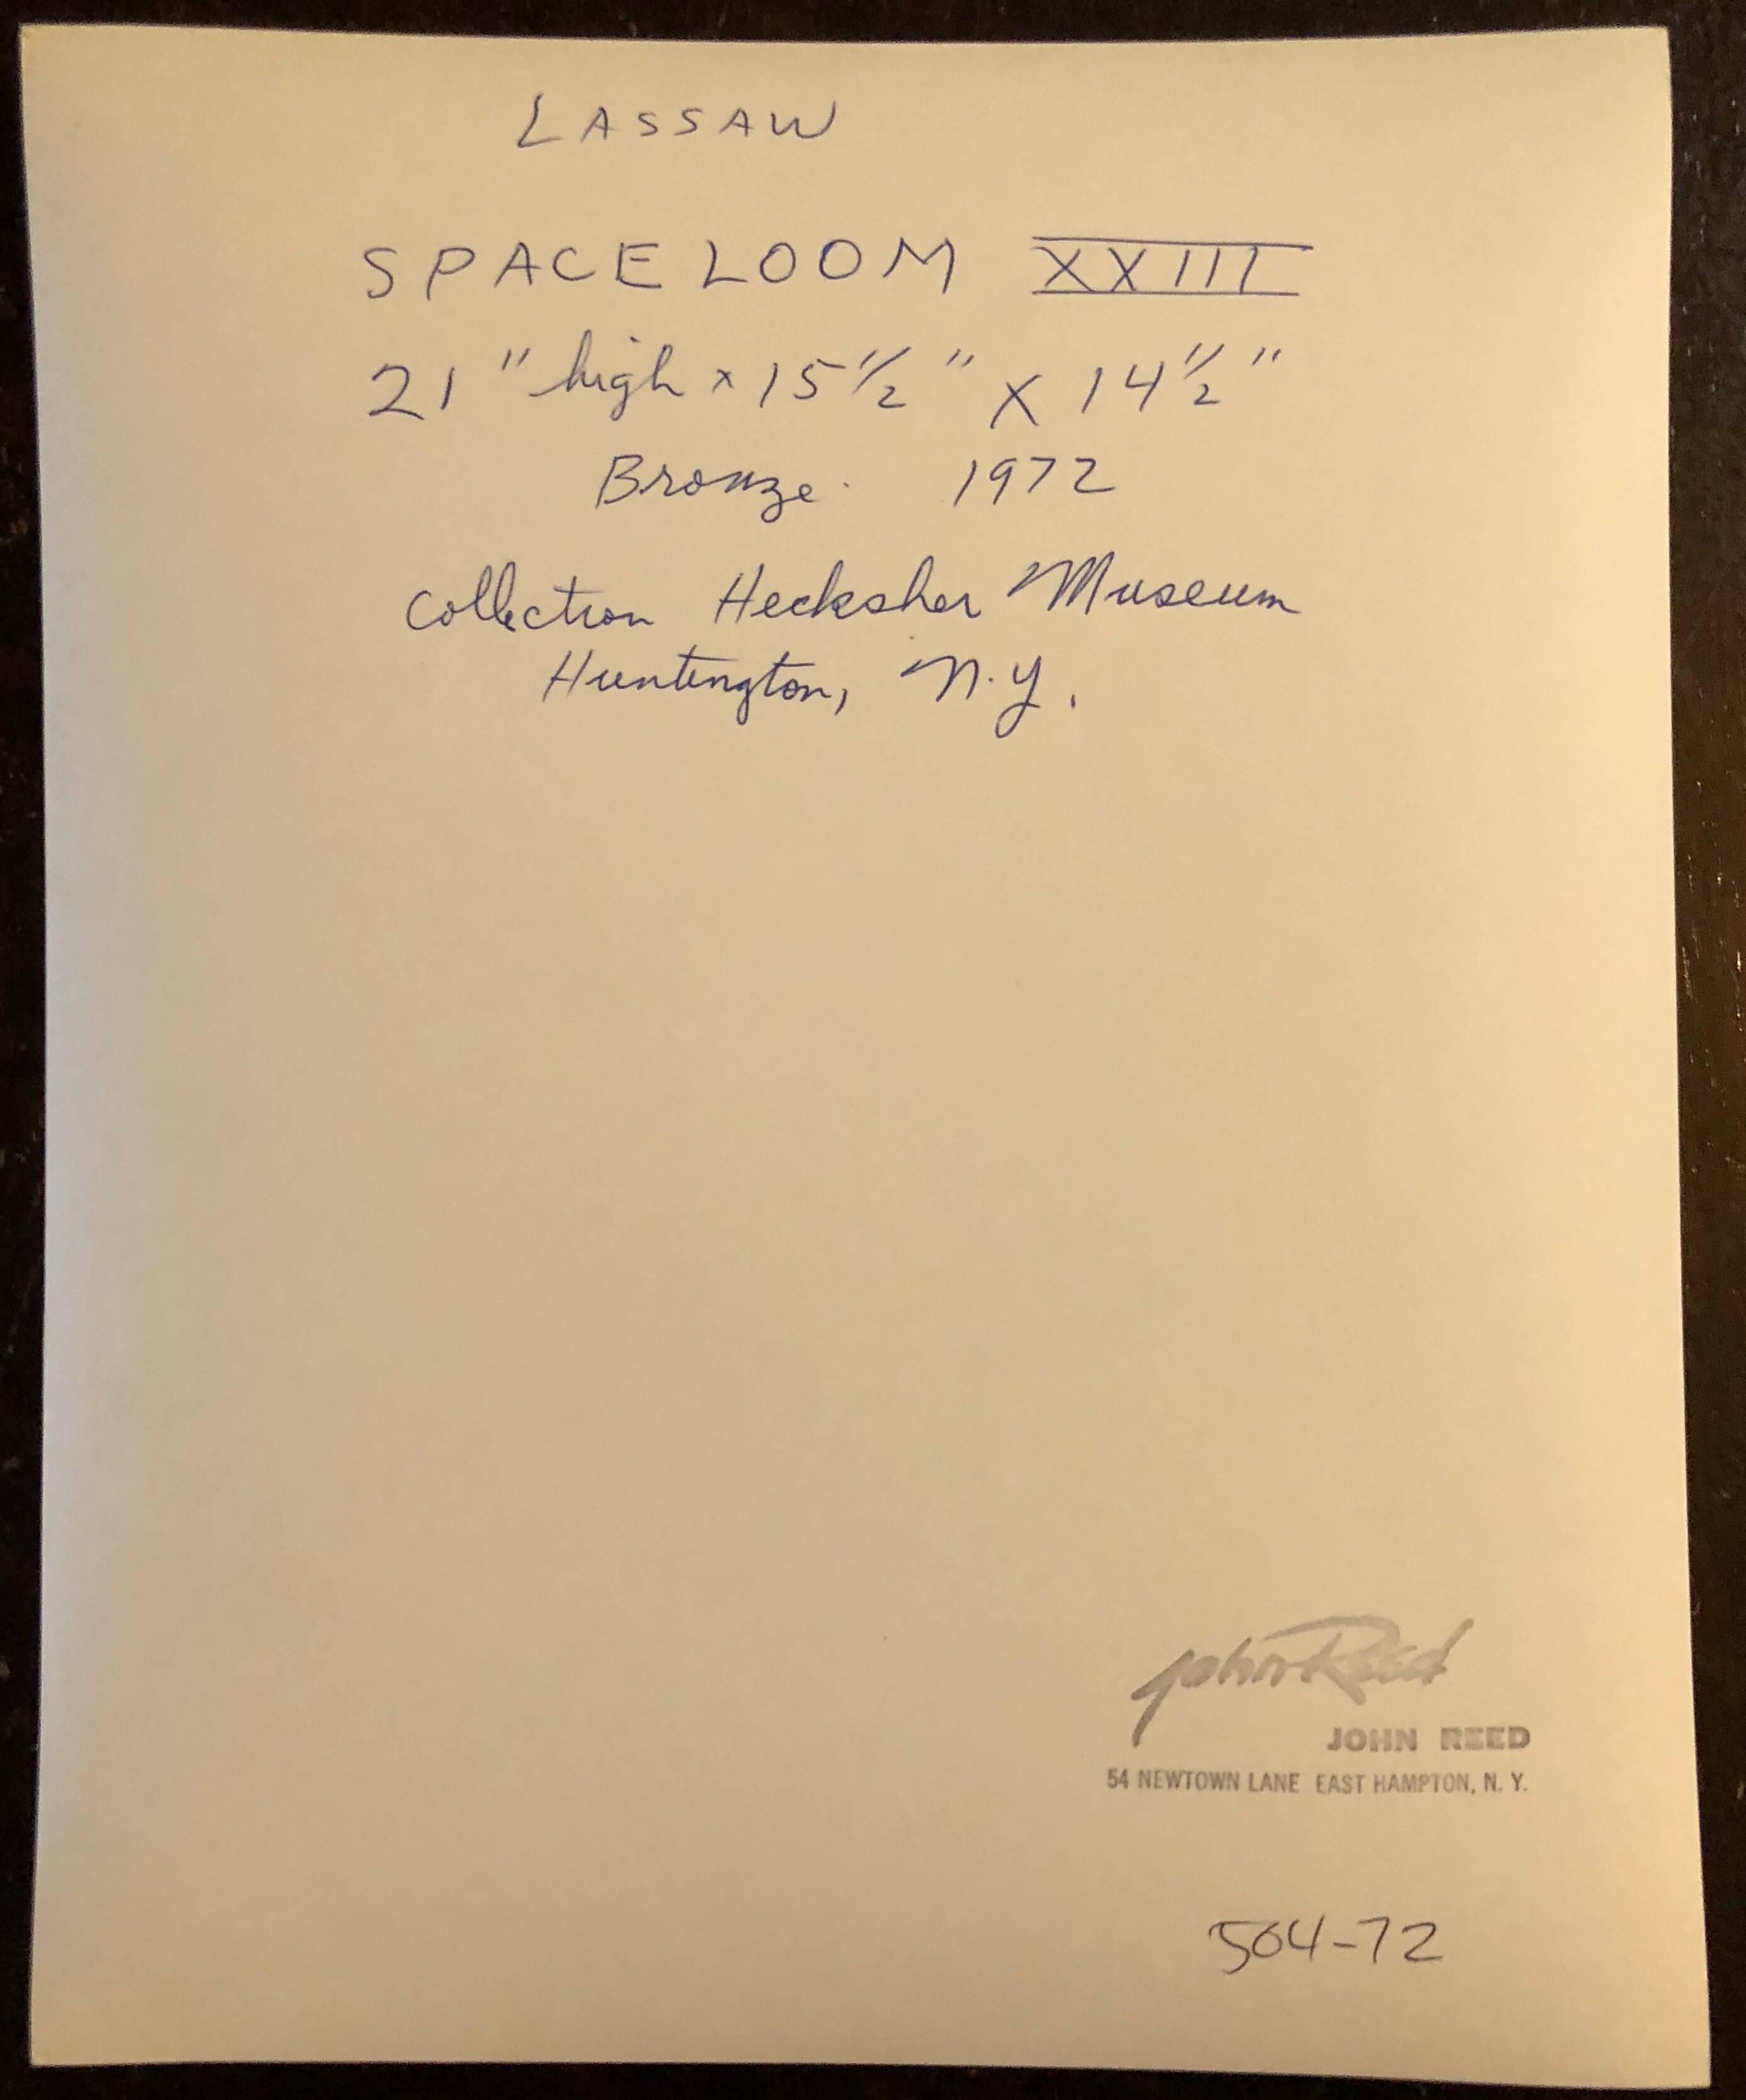 Spaceloom XXIII
The Photographer is John Reed. It bears his stamp verso. An East Hampton Photographer who shot Jackson Pollock, Lee Krasner, Larry Rivers, Philip Guston, Conrad Marca-Relli, Syd Solomon, and James Brooks amongst other art